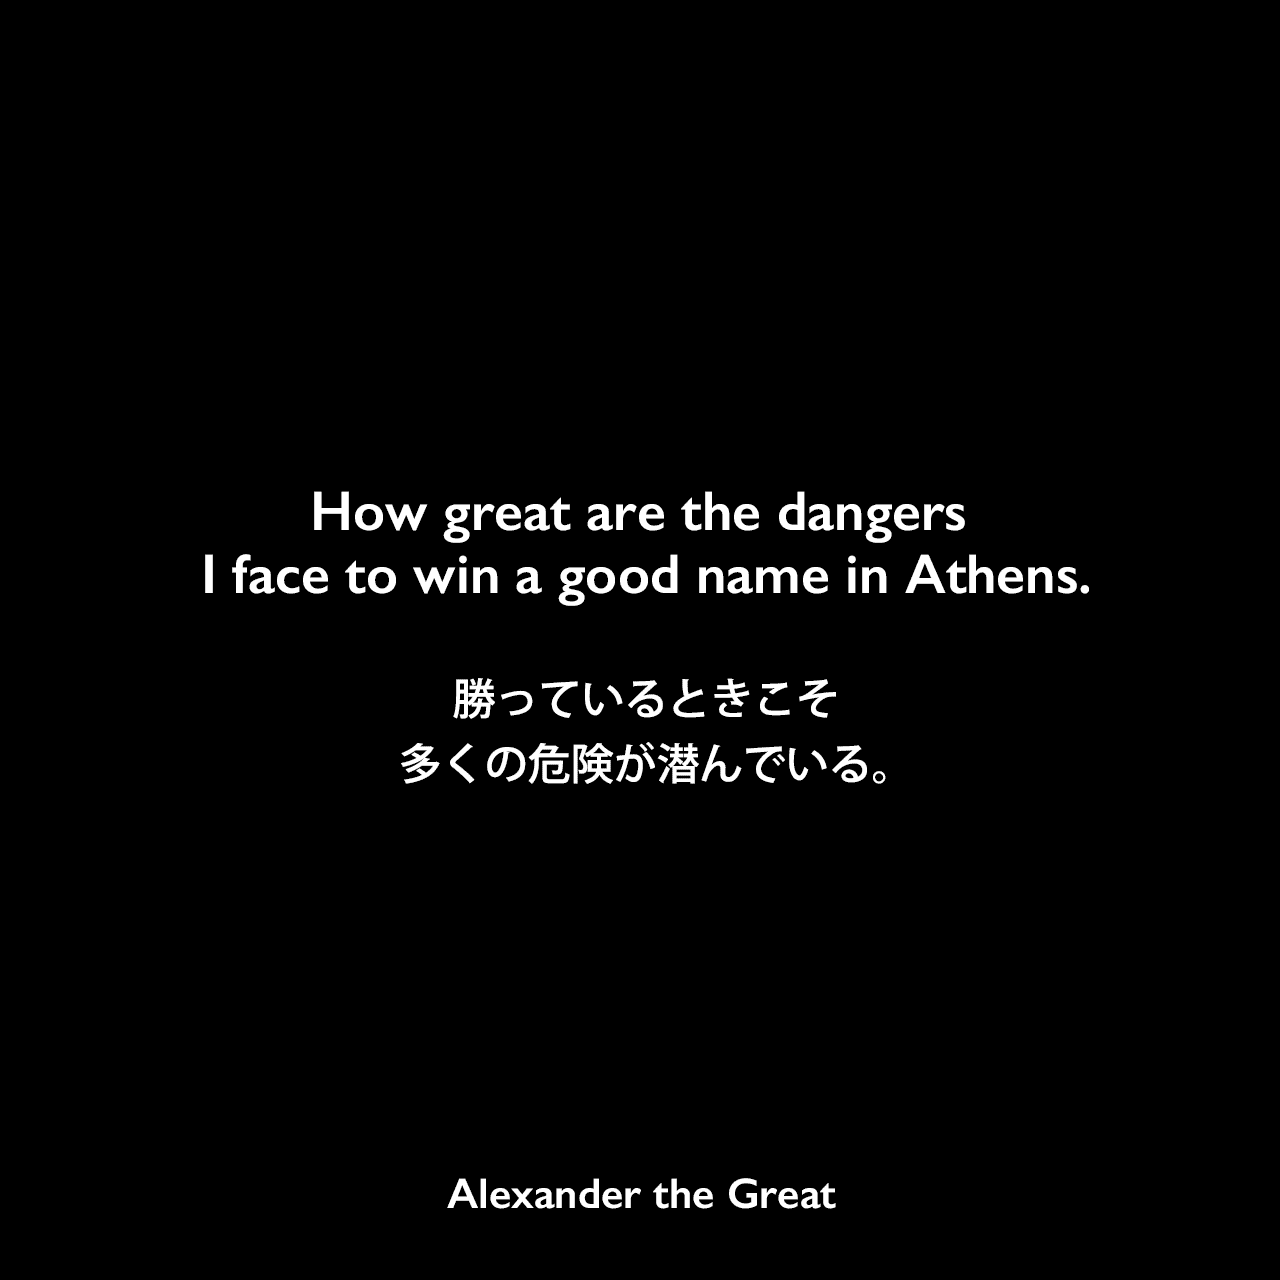 How great are the dangers I face to win a good name in Athens.勝っているときこそ多くの危険が潜んでいる。Alexander the Great